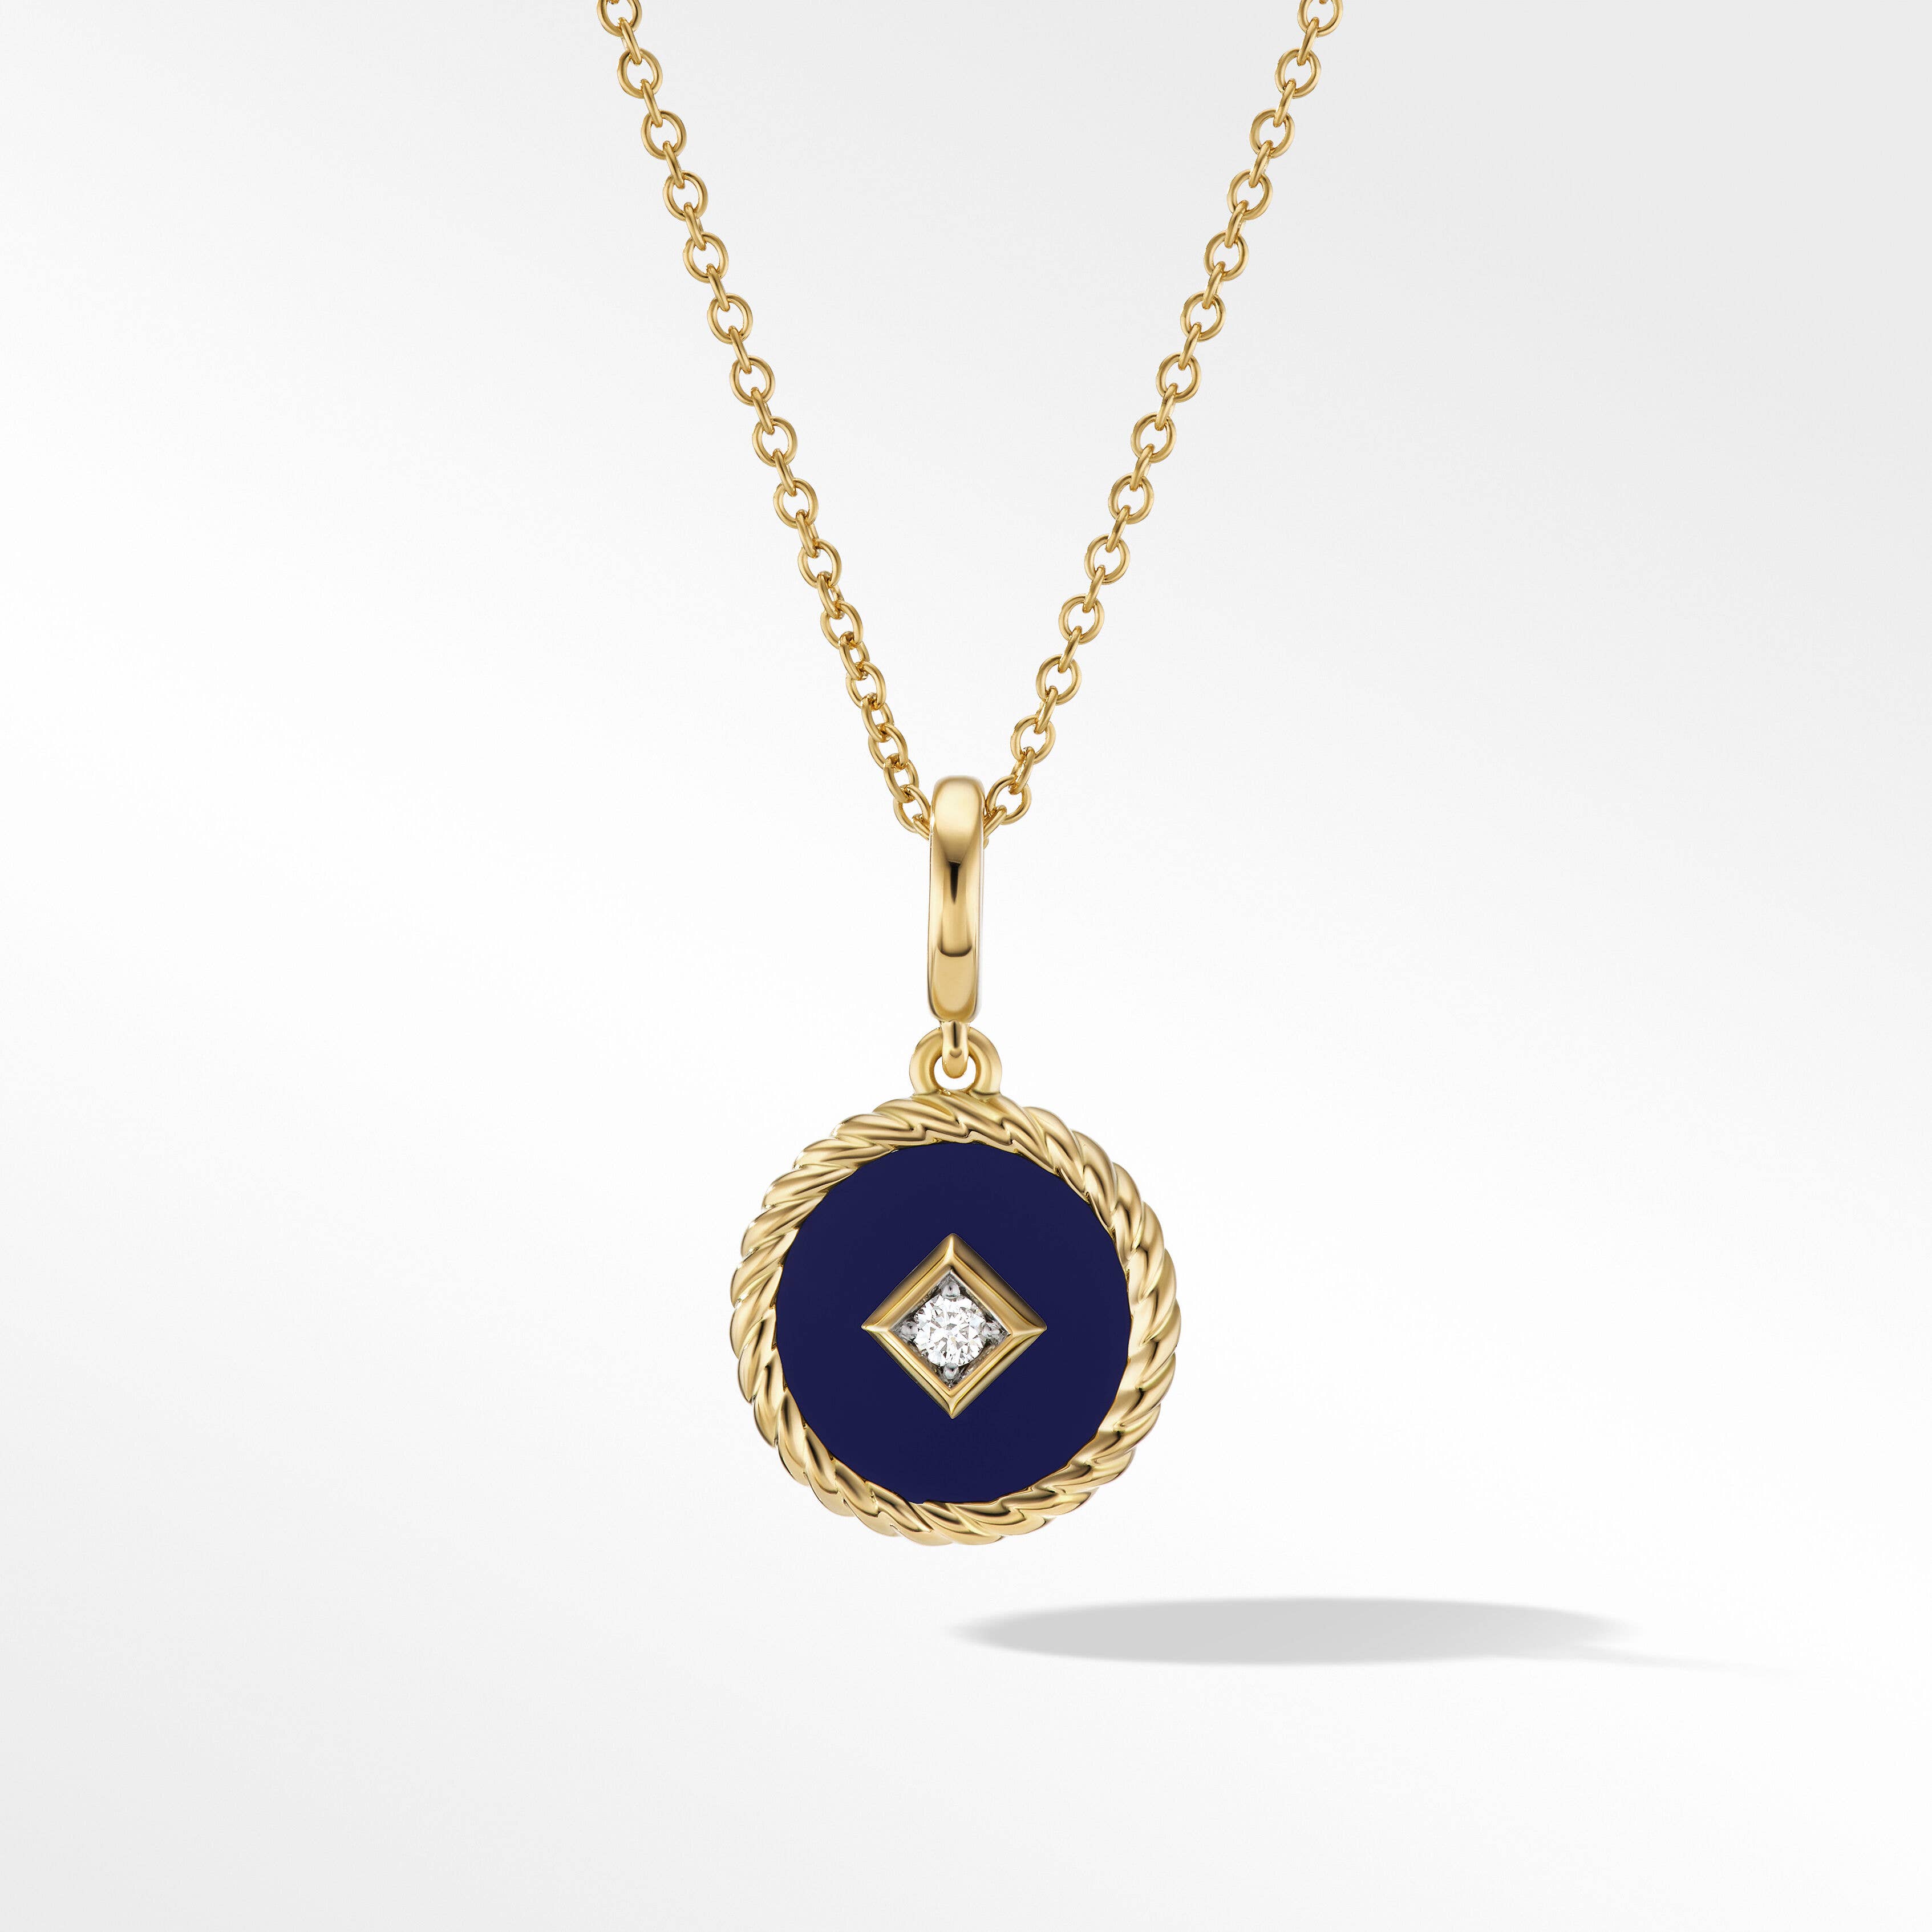 Cable Collectibles® Navy Enamel Charm Necklace in 18K Yellow Gold with Center Diamond